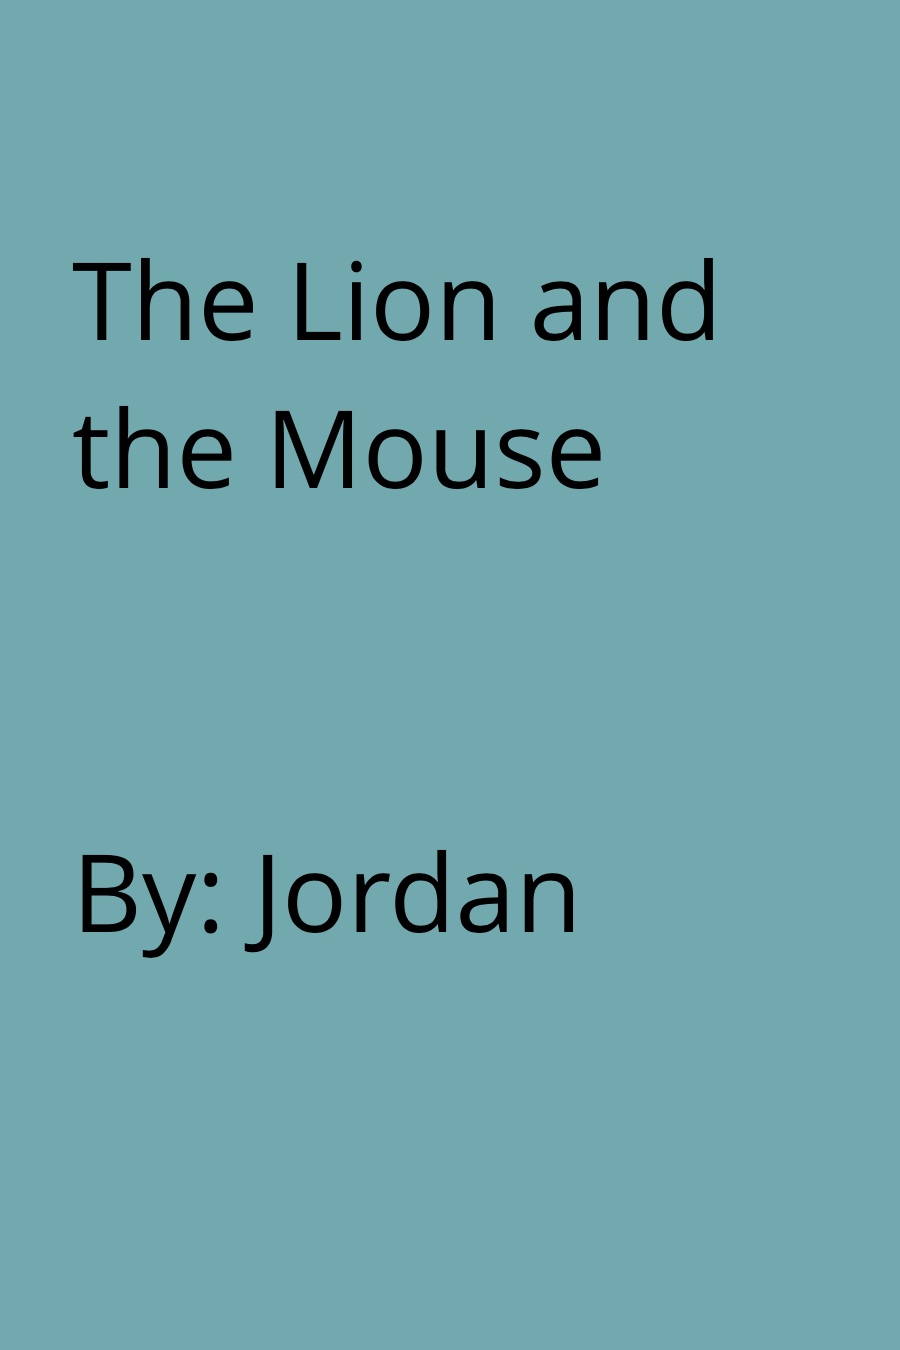 The Lion and the Mouse by Jordan L